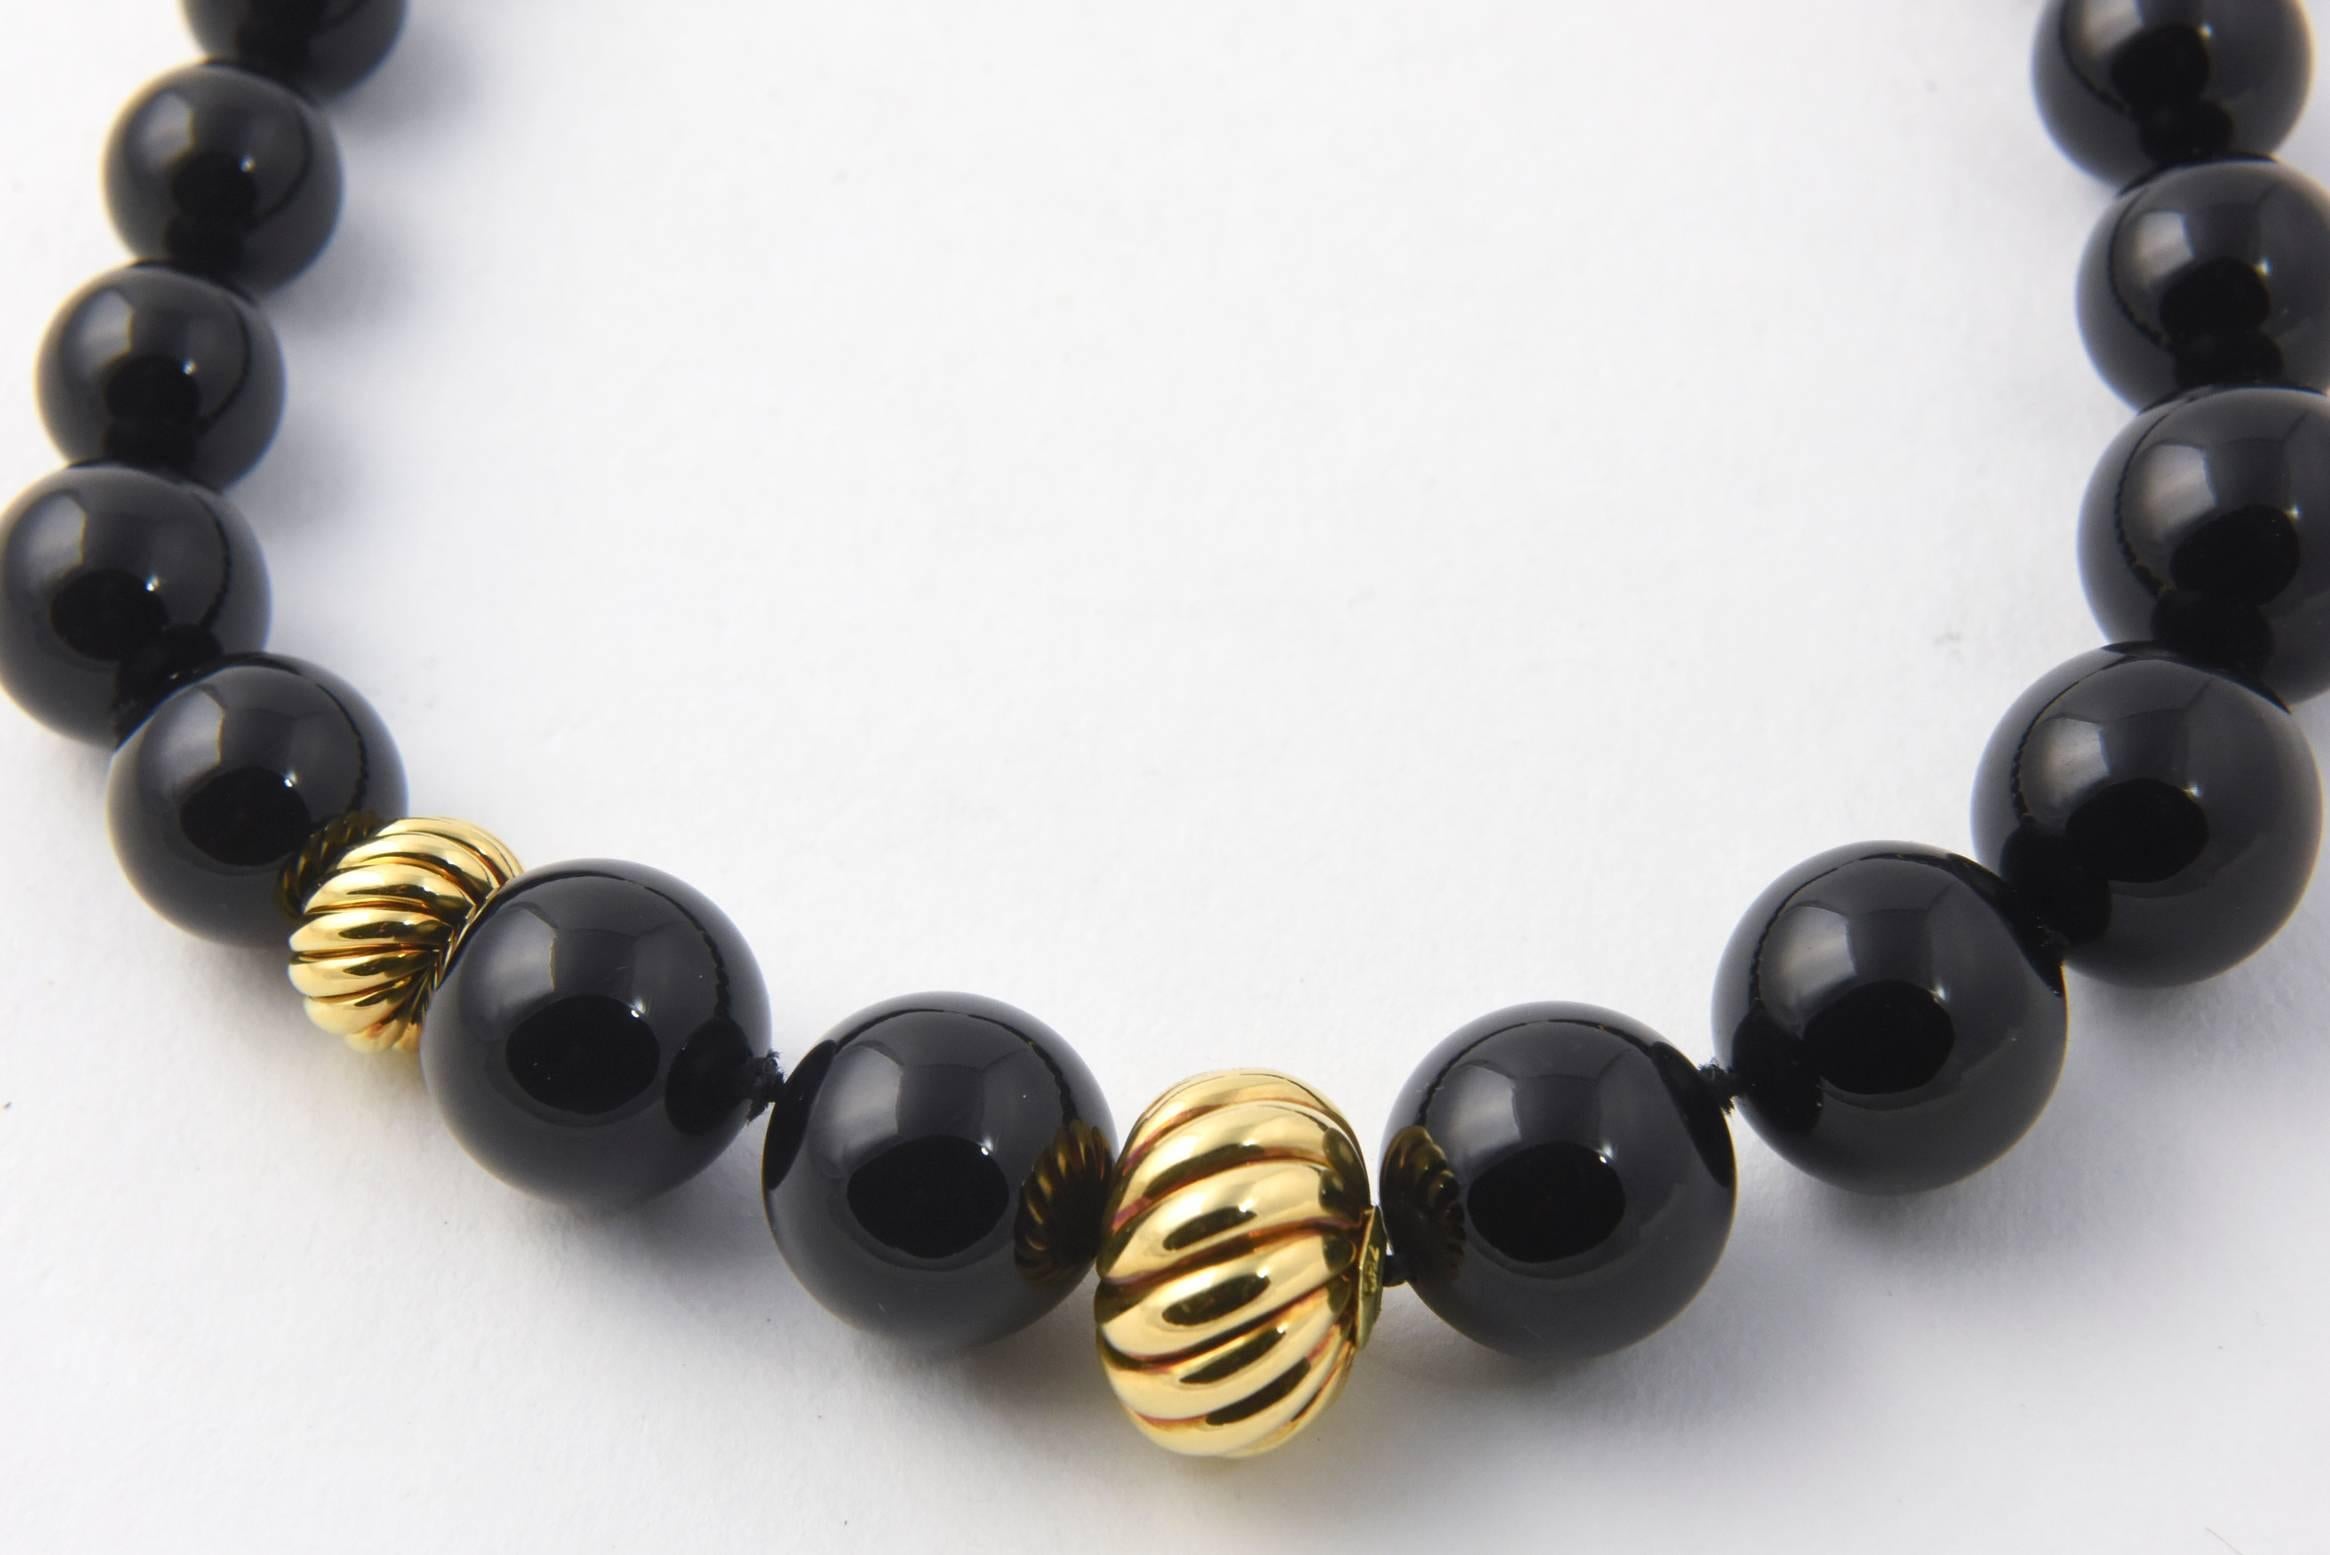 David Yurman signature collection black onyx necklace with 18K gold bead accents and hook clasp.